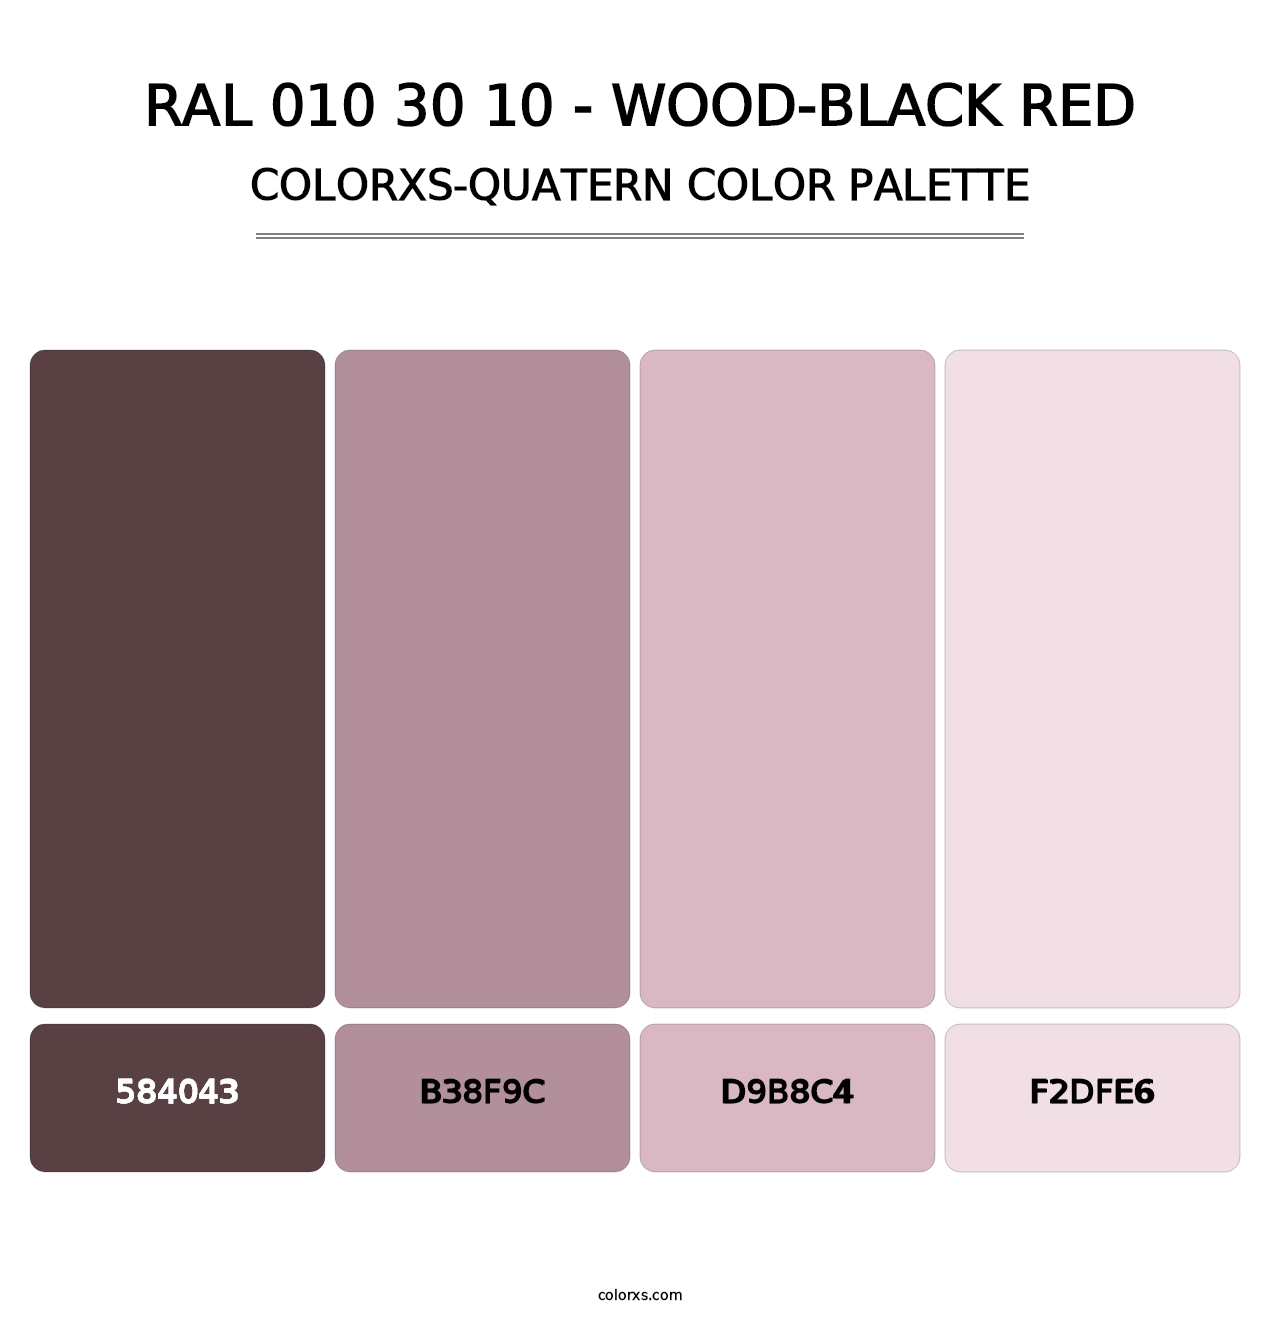 RAL 010 30 10 - Wood-Black Red - Colorxs Quatern Palette